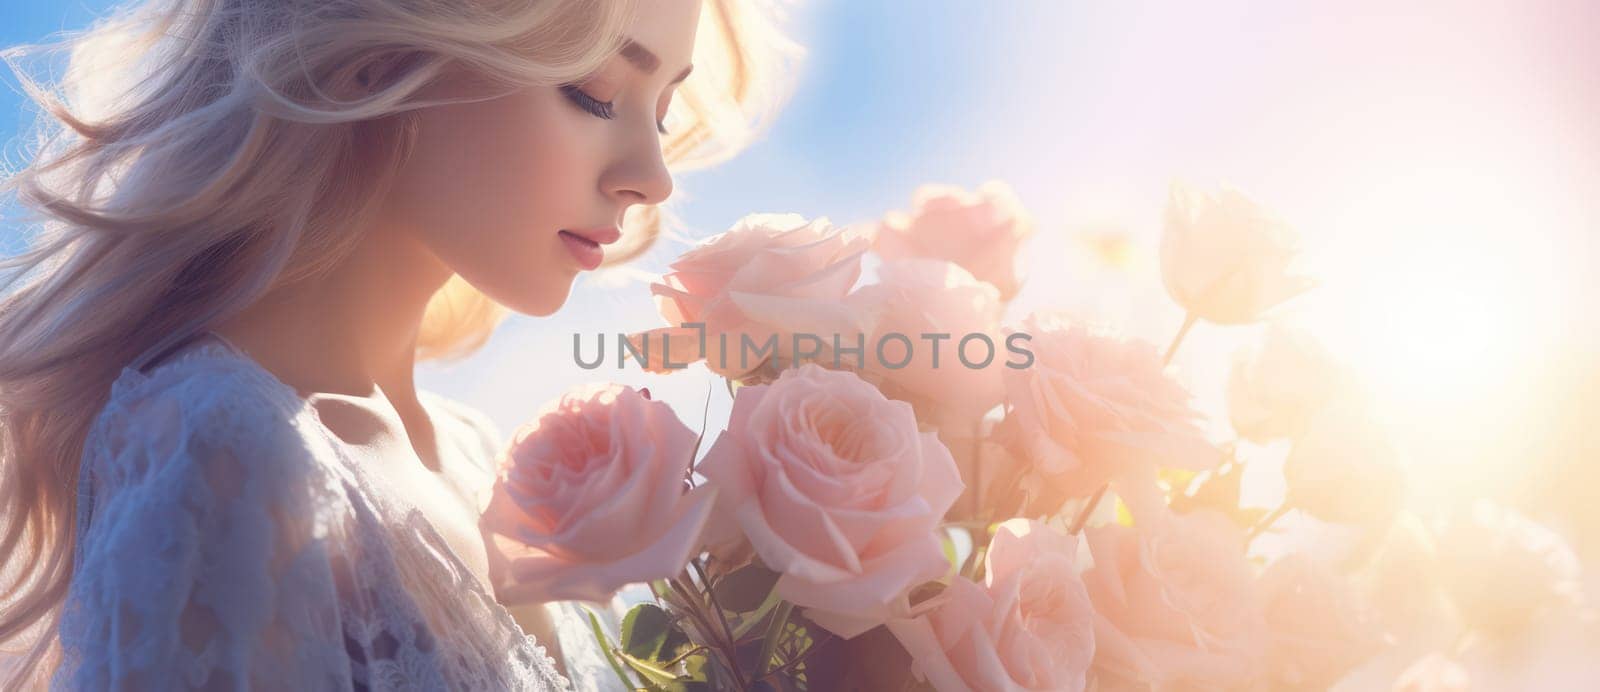 Caucasian Beauty: Young, Attractive Women's Portrait with a Bouquet of White Flowers